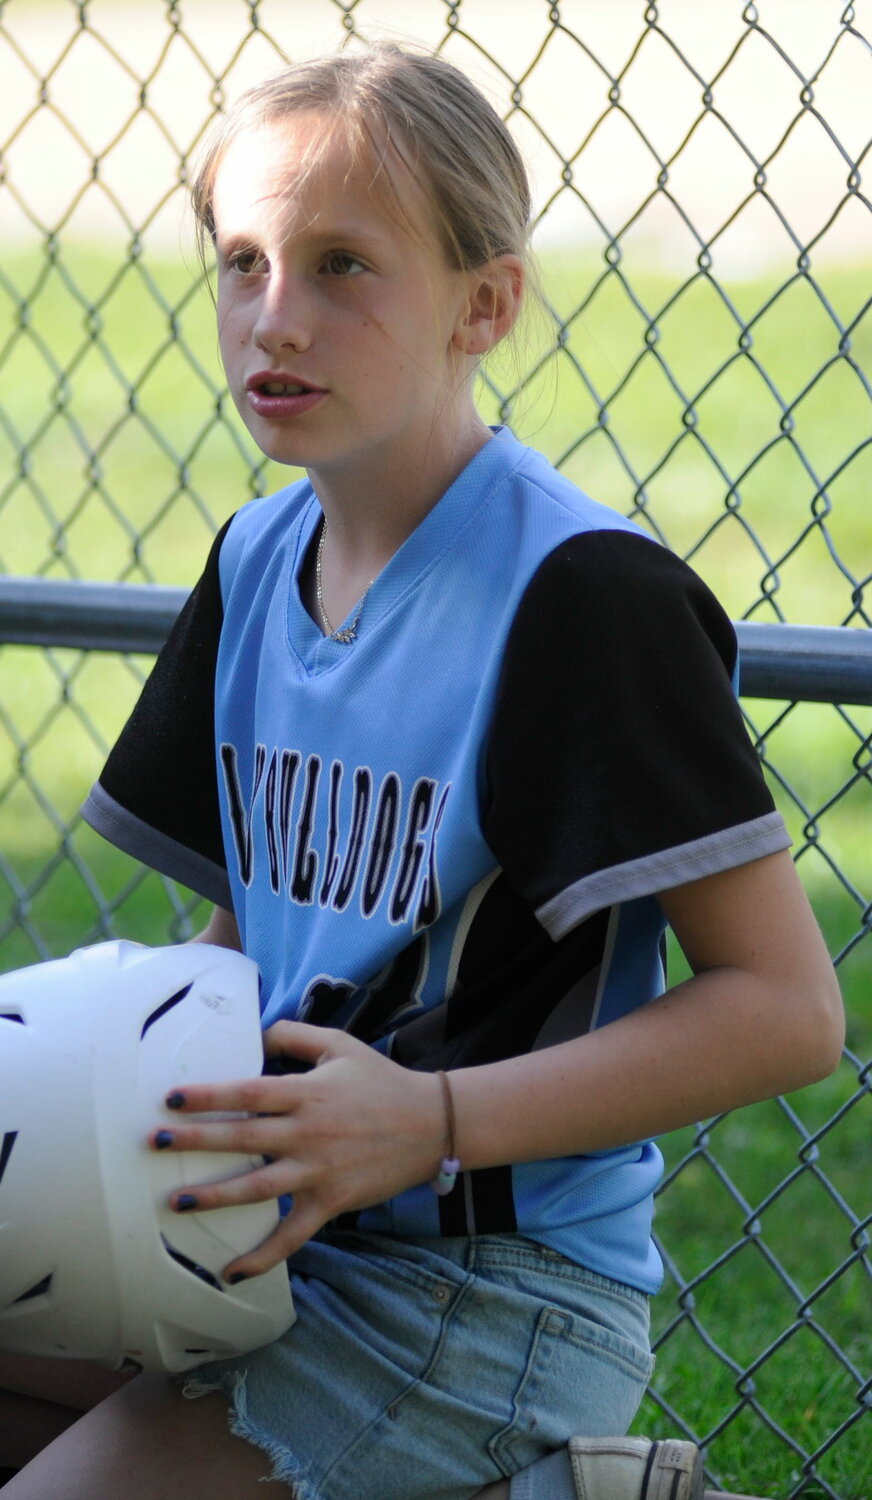 Allie Hellerer, #42, is the fifth-grade, 10-year-old co-manager for Sullivan West’s varsity softball squad. A Little Leaguer, she pitches and plays first base, and is pictured arranging bats and helmets between innings...